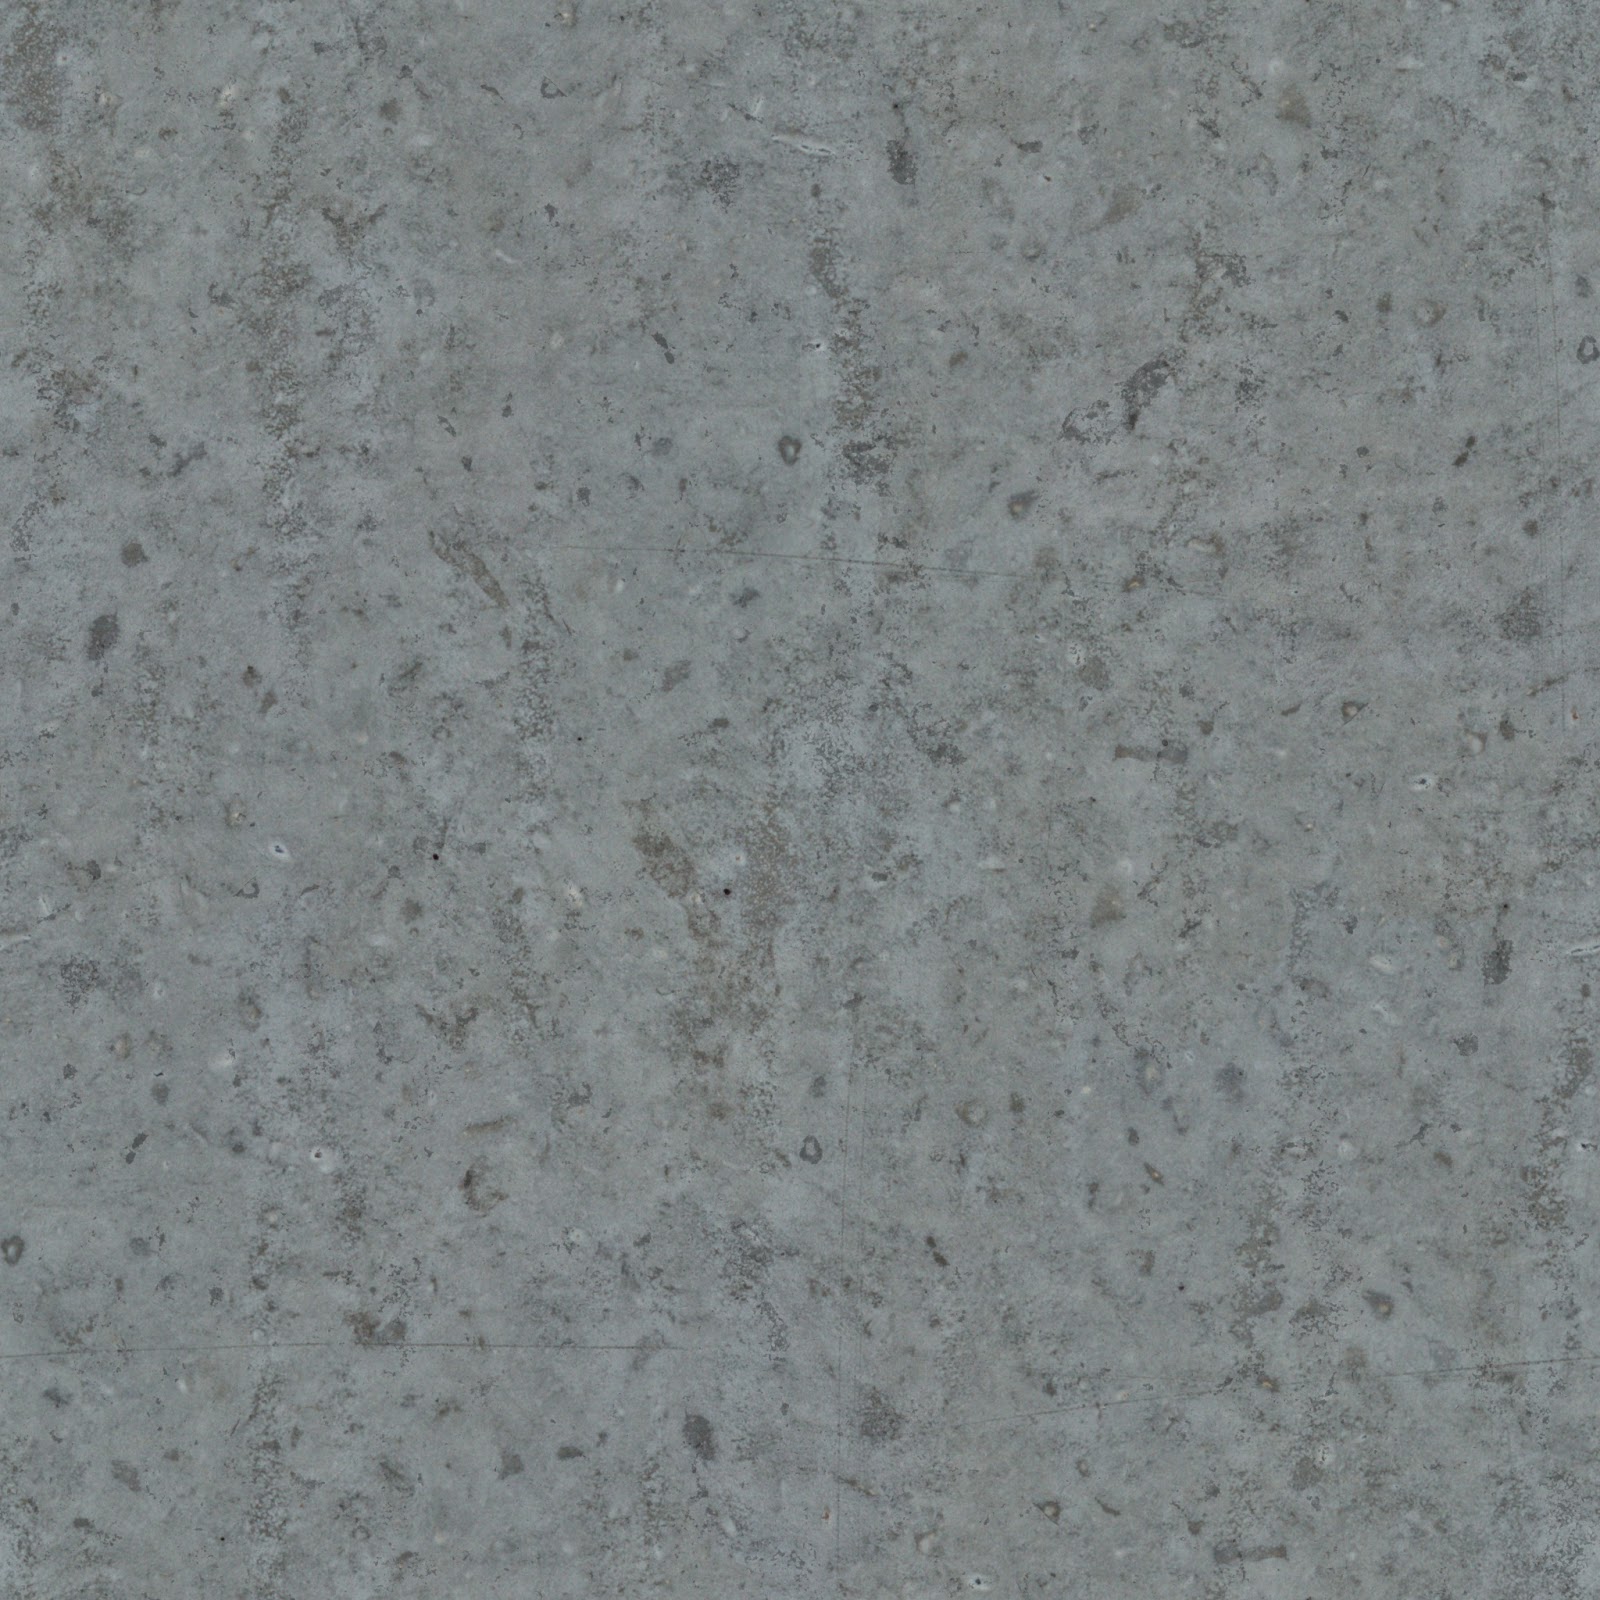 High Resolution Seamless Textures: (CONCRETE 24) granite wall smooth ...